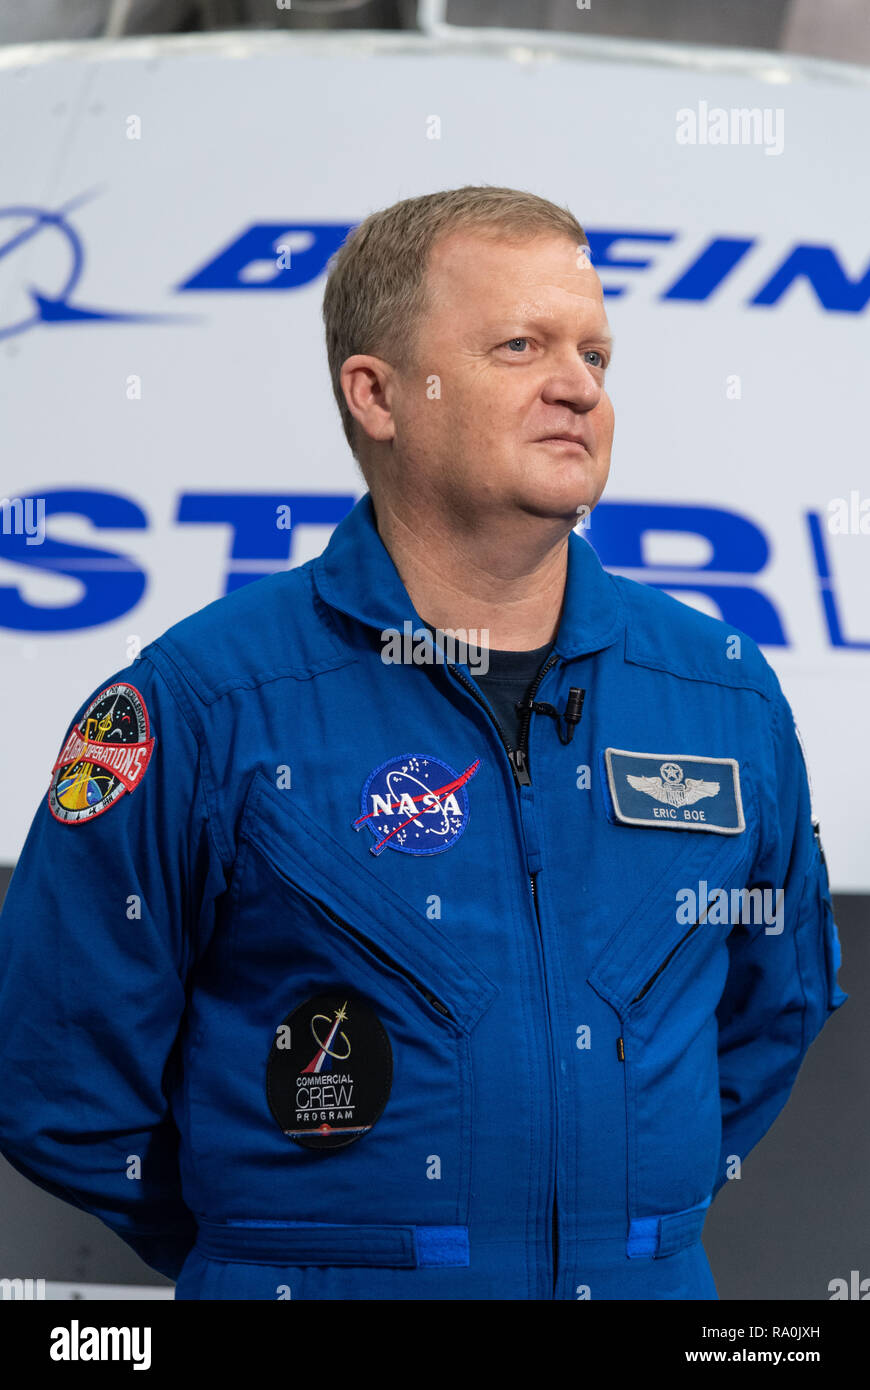 NASA Boeing commercial crew astronaut Eric Boe during the announcement of astronauts selected for the Boeing and SpaceX commercial crews at the Johnson Space Center August 3, 2018 in Houston, Texas. Stock Photo